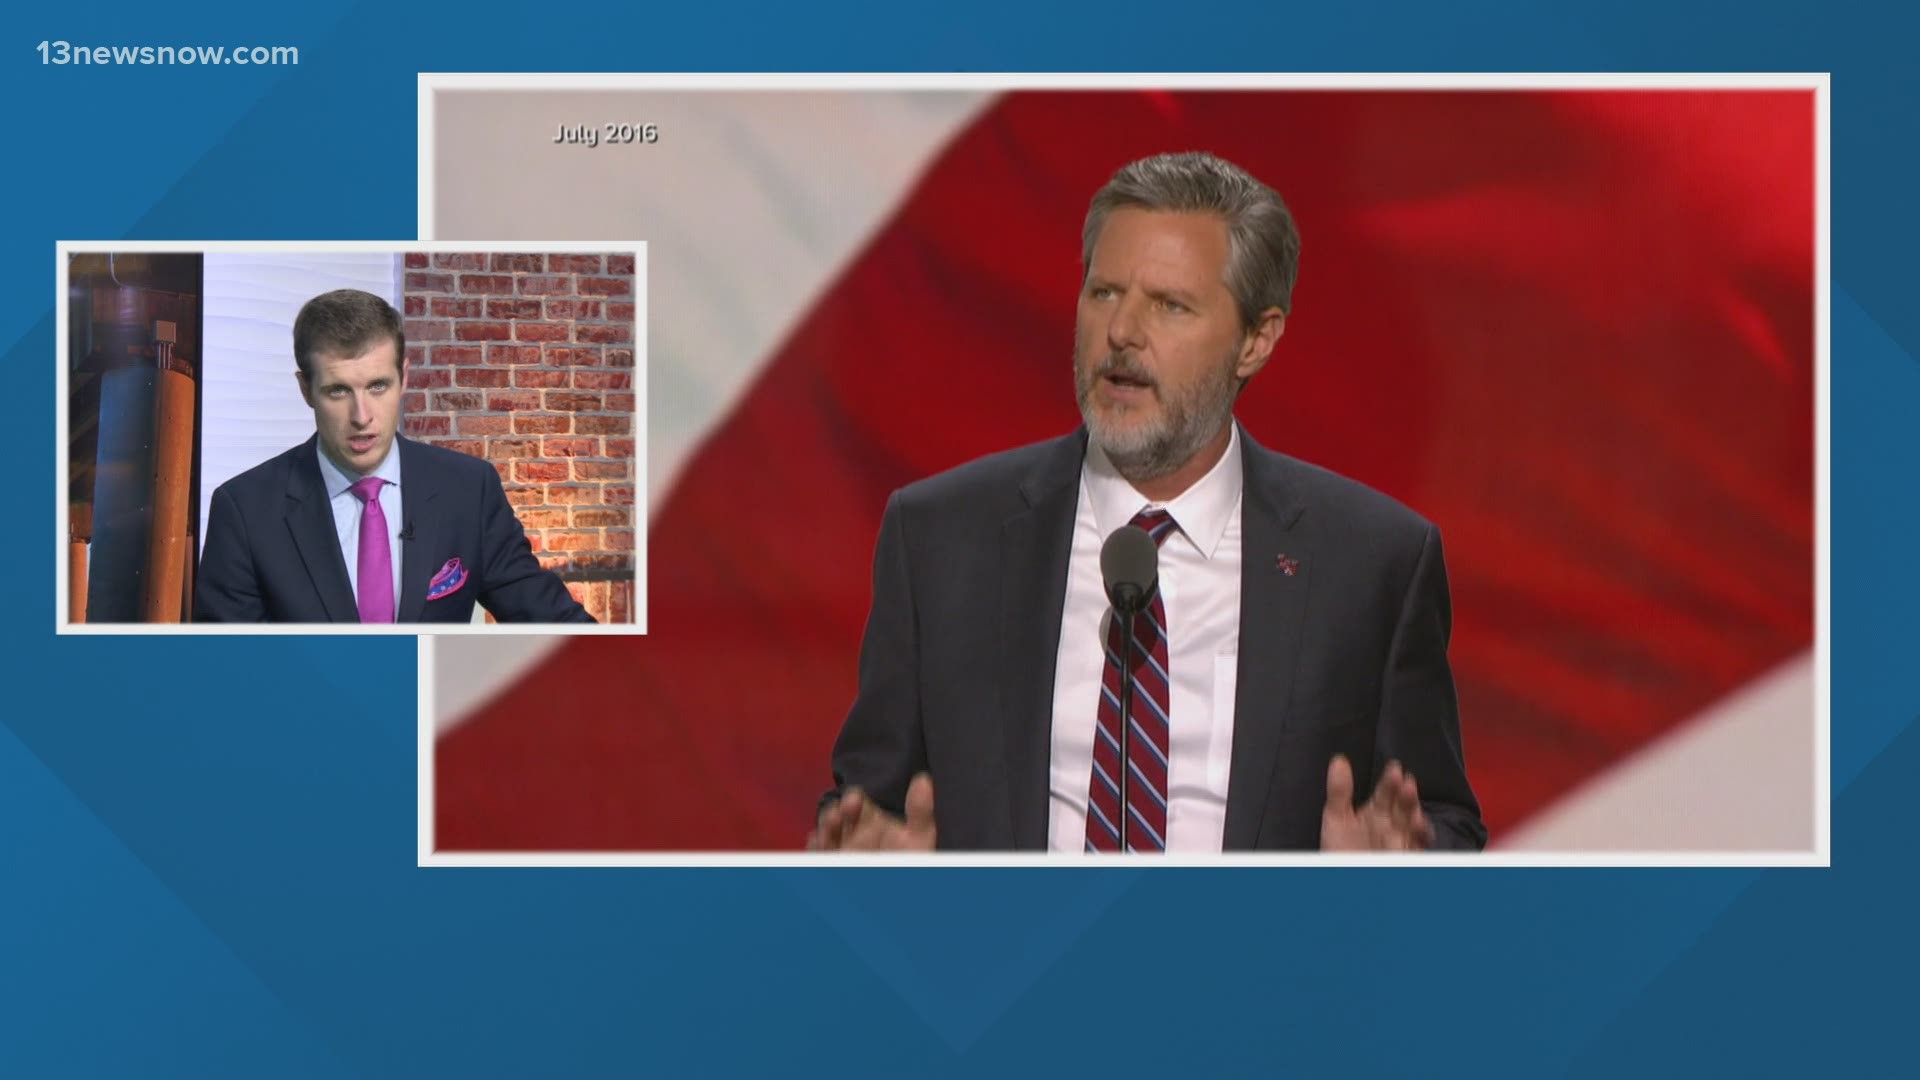 Jerry Falwell Jr. is alleging the evangelical school founded by his late pastor father defamed him through statements it issued.